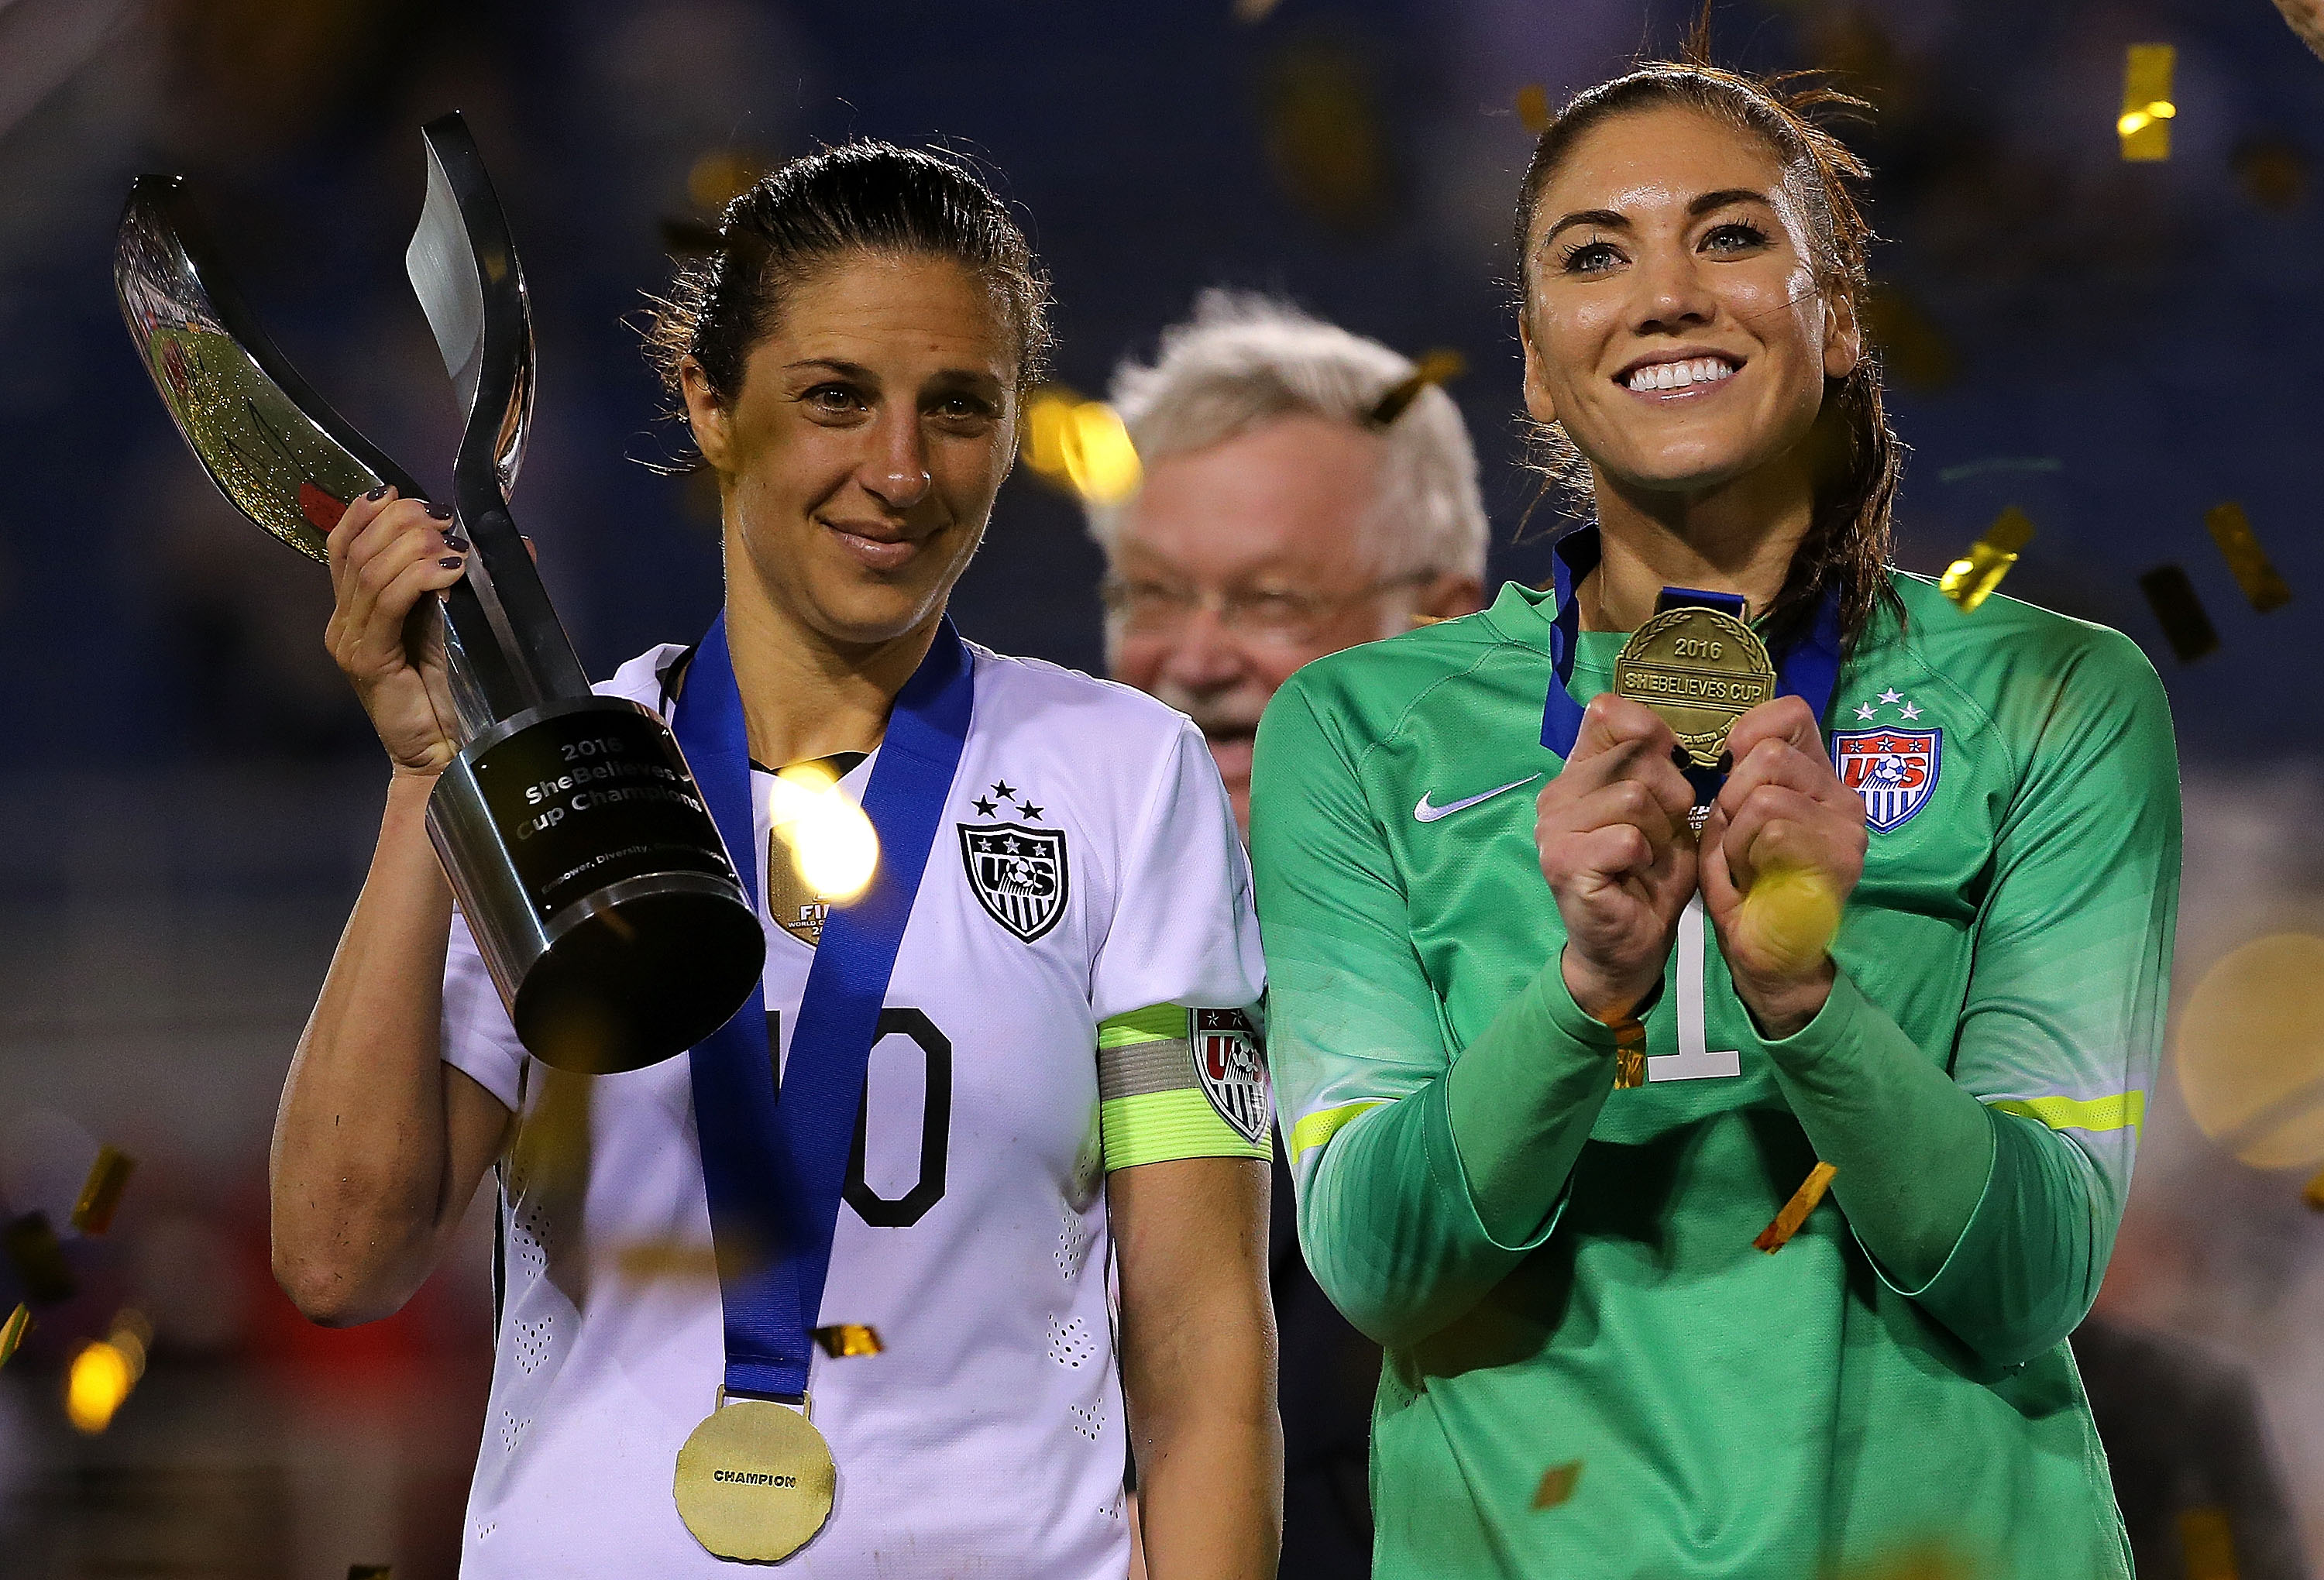 Hope Solo #1 and Carli Lloyd #10 of the United States celebrate after winning a match against Germany in the 2016 SheBelieves Cup on March 9, 2016 in Boca Raton, Fla. (Mike Ehrmann—Getty Images)